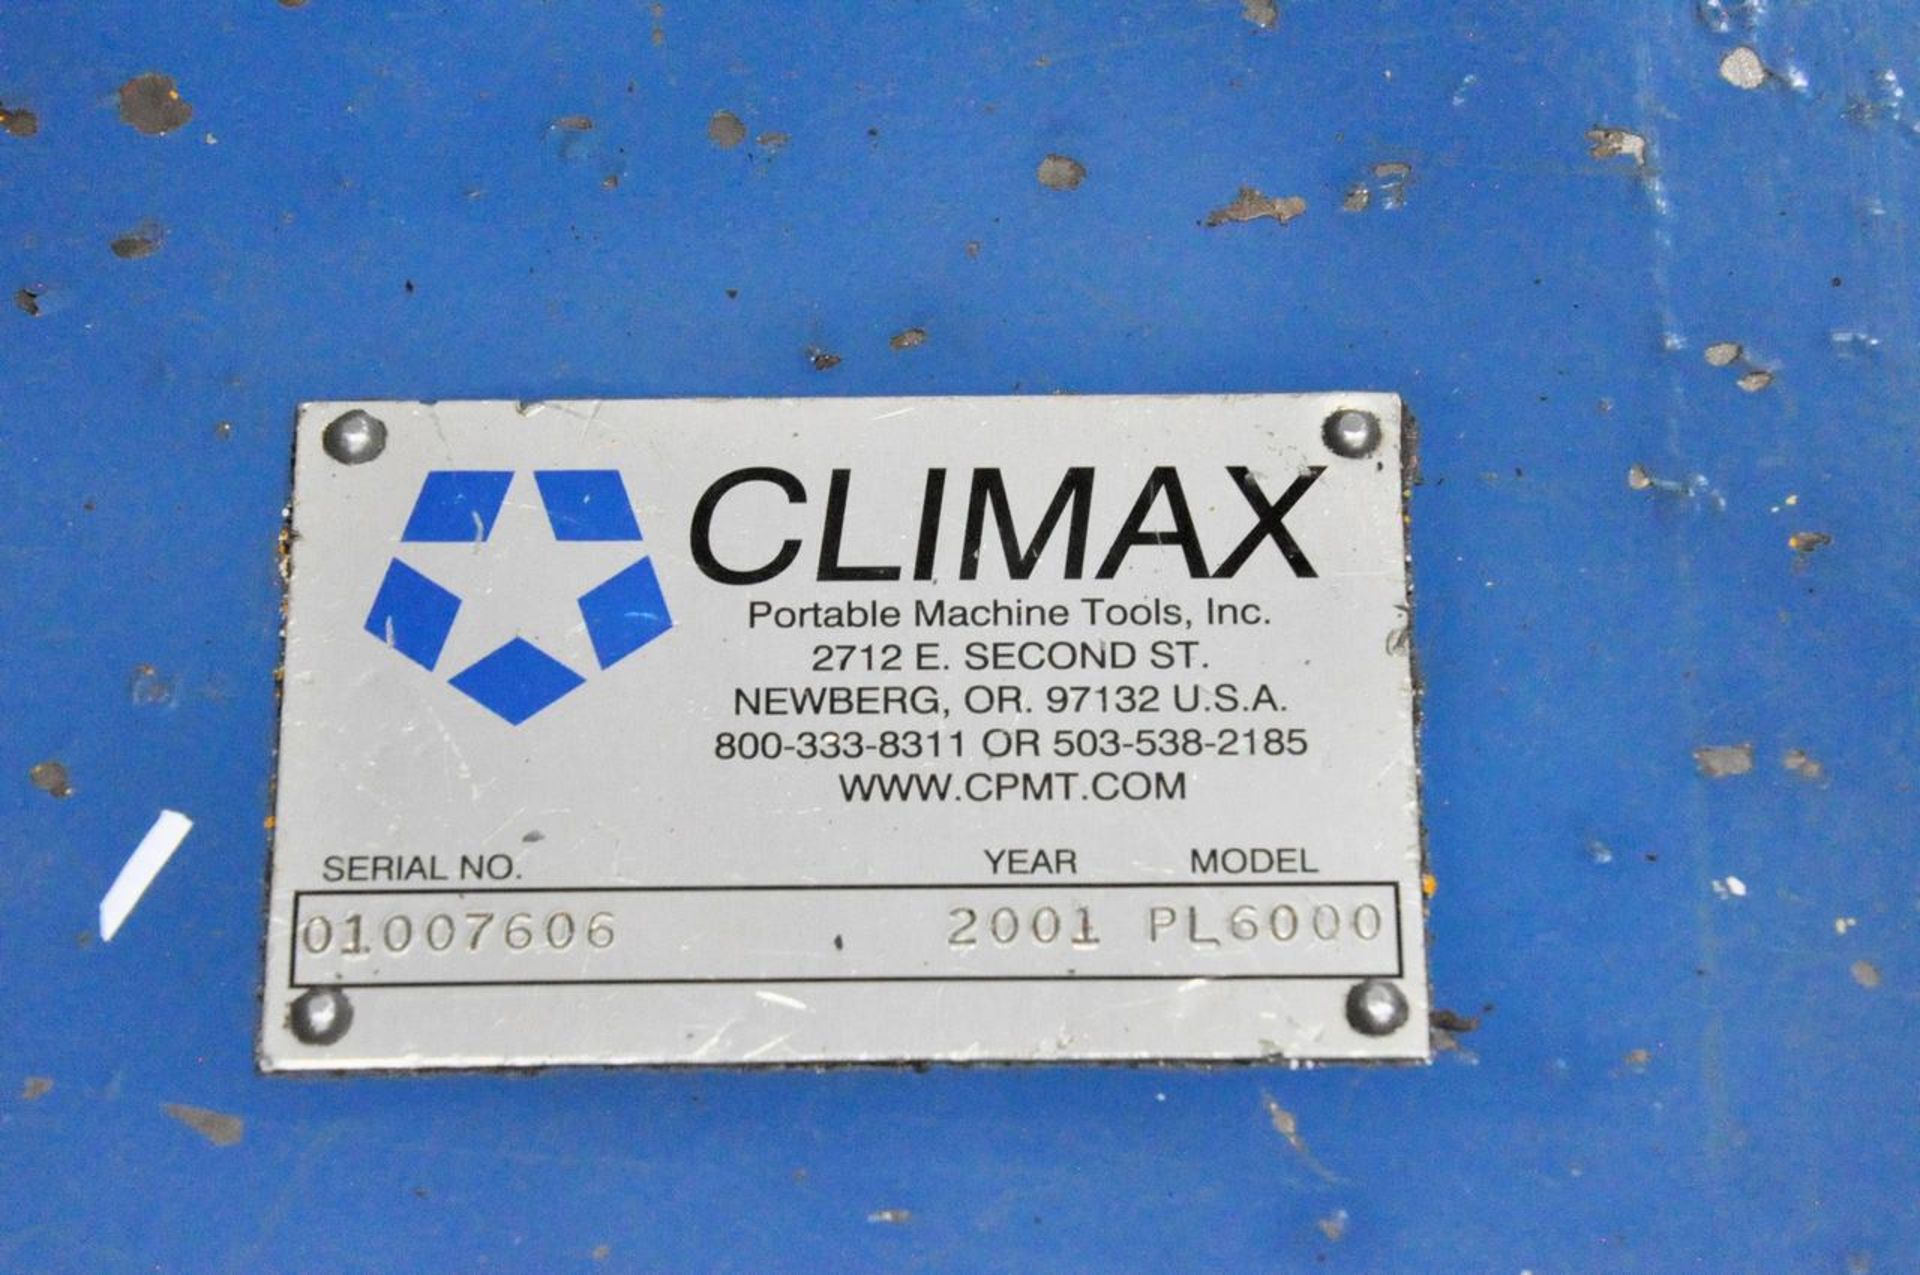 2001 Climax PL6000 Portable Mill - Image 6 of 6